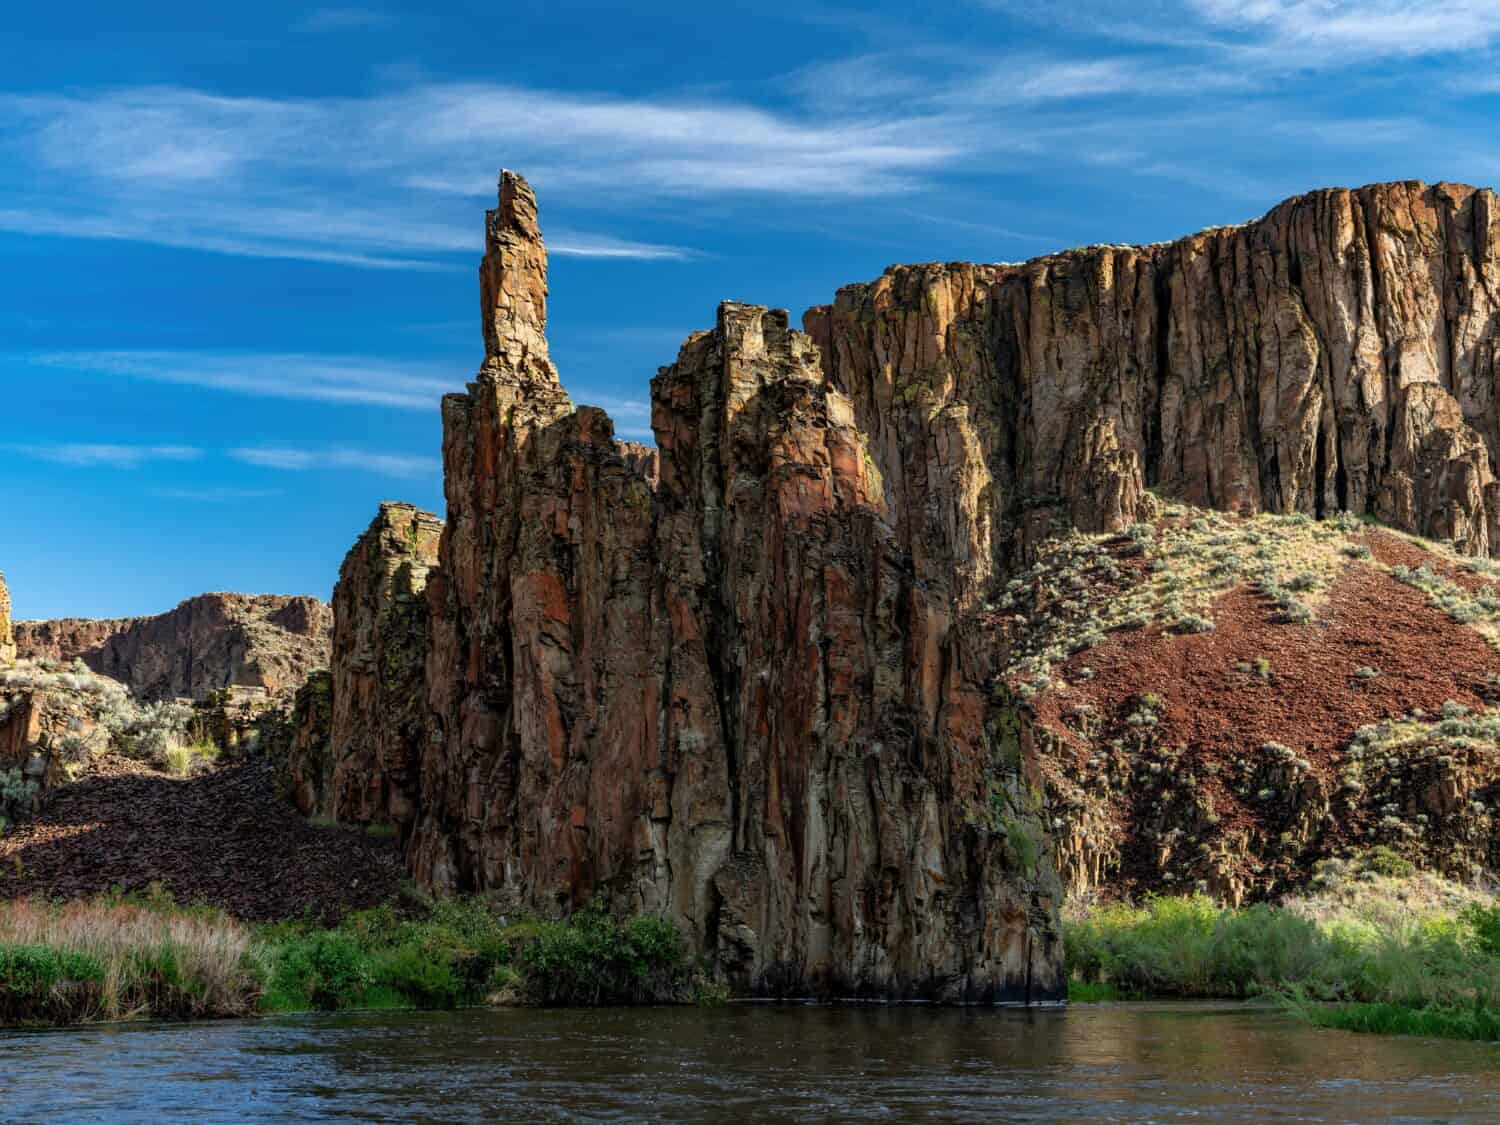 Owyhee River rock formations with blue sky above